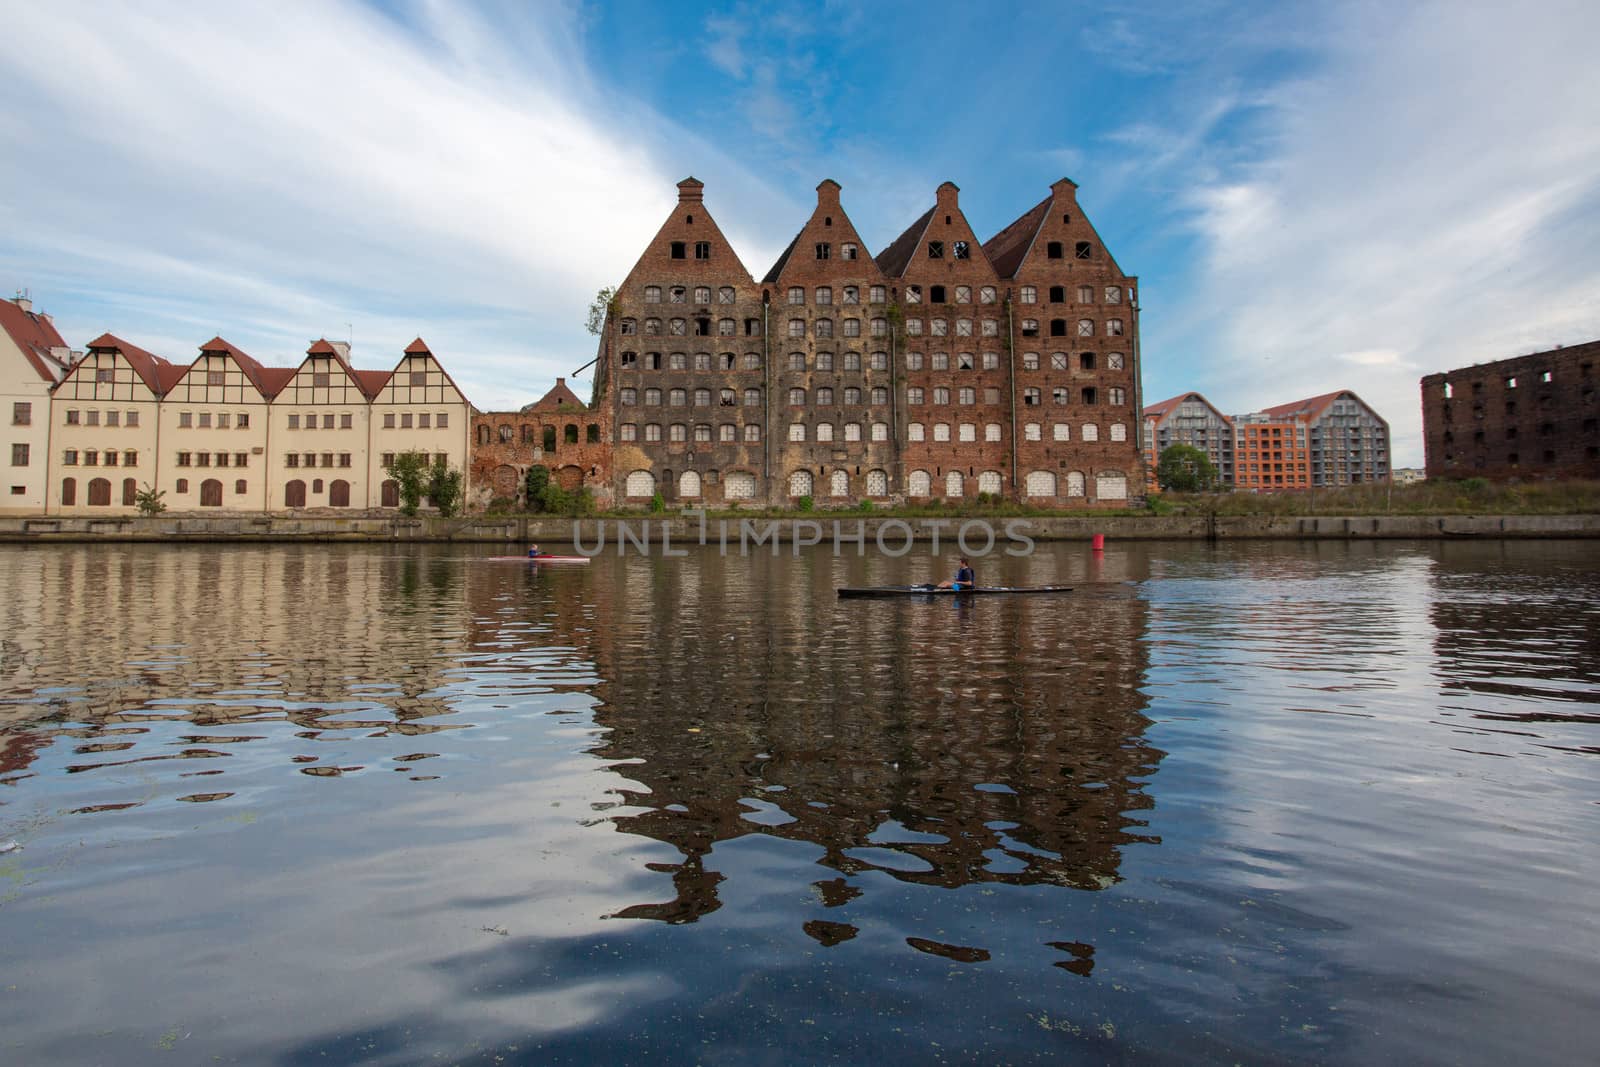 GDANSK, POLAND, SEPTEMBER 18: Unidentified people rowing on the Motlawa River in front of abandoned old industrial buildings, free city of Gdansk - 2013, Danzig, Poland